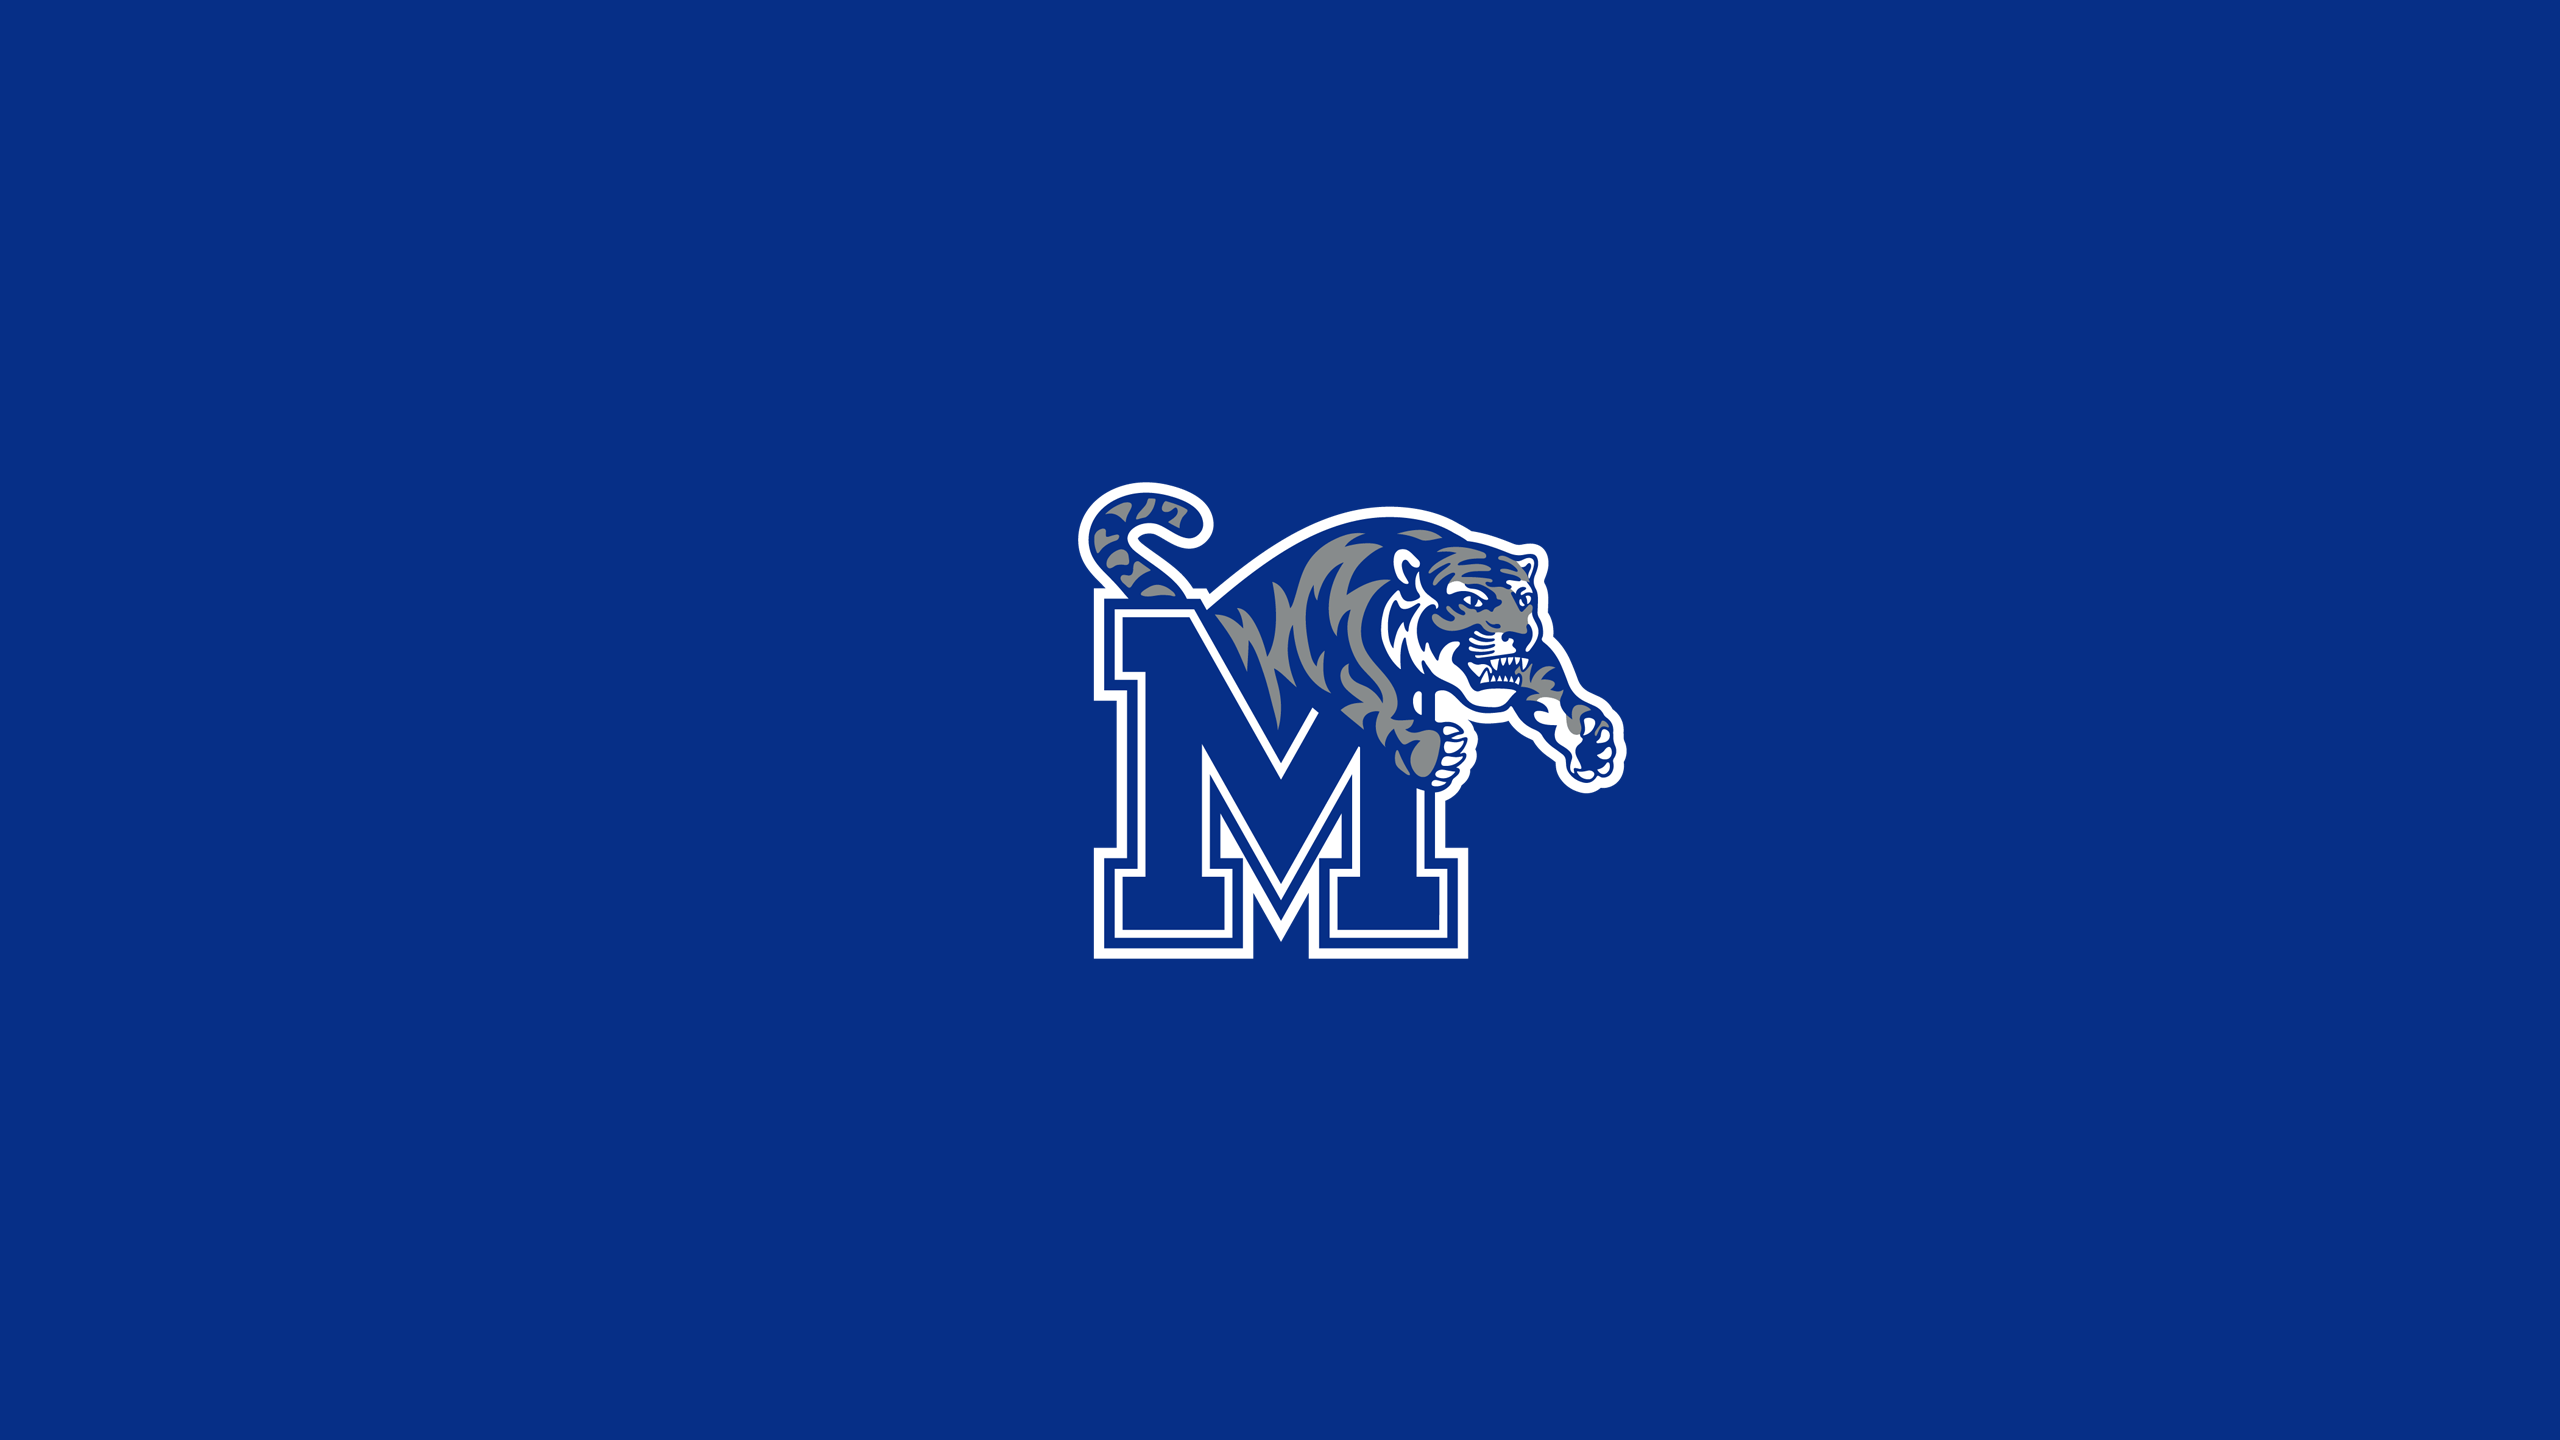 Memphis Tigers Football - NCAAF - Square Bettor